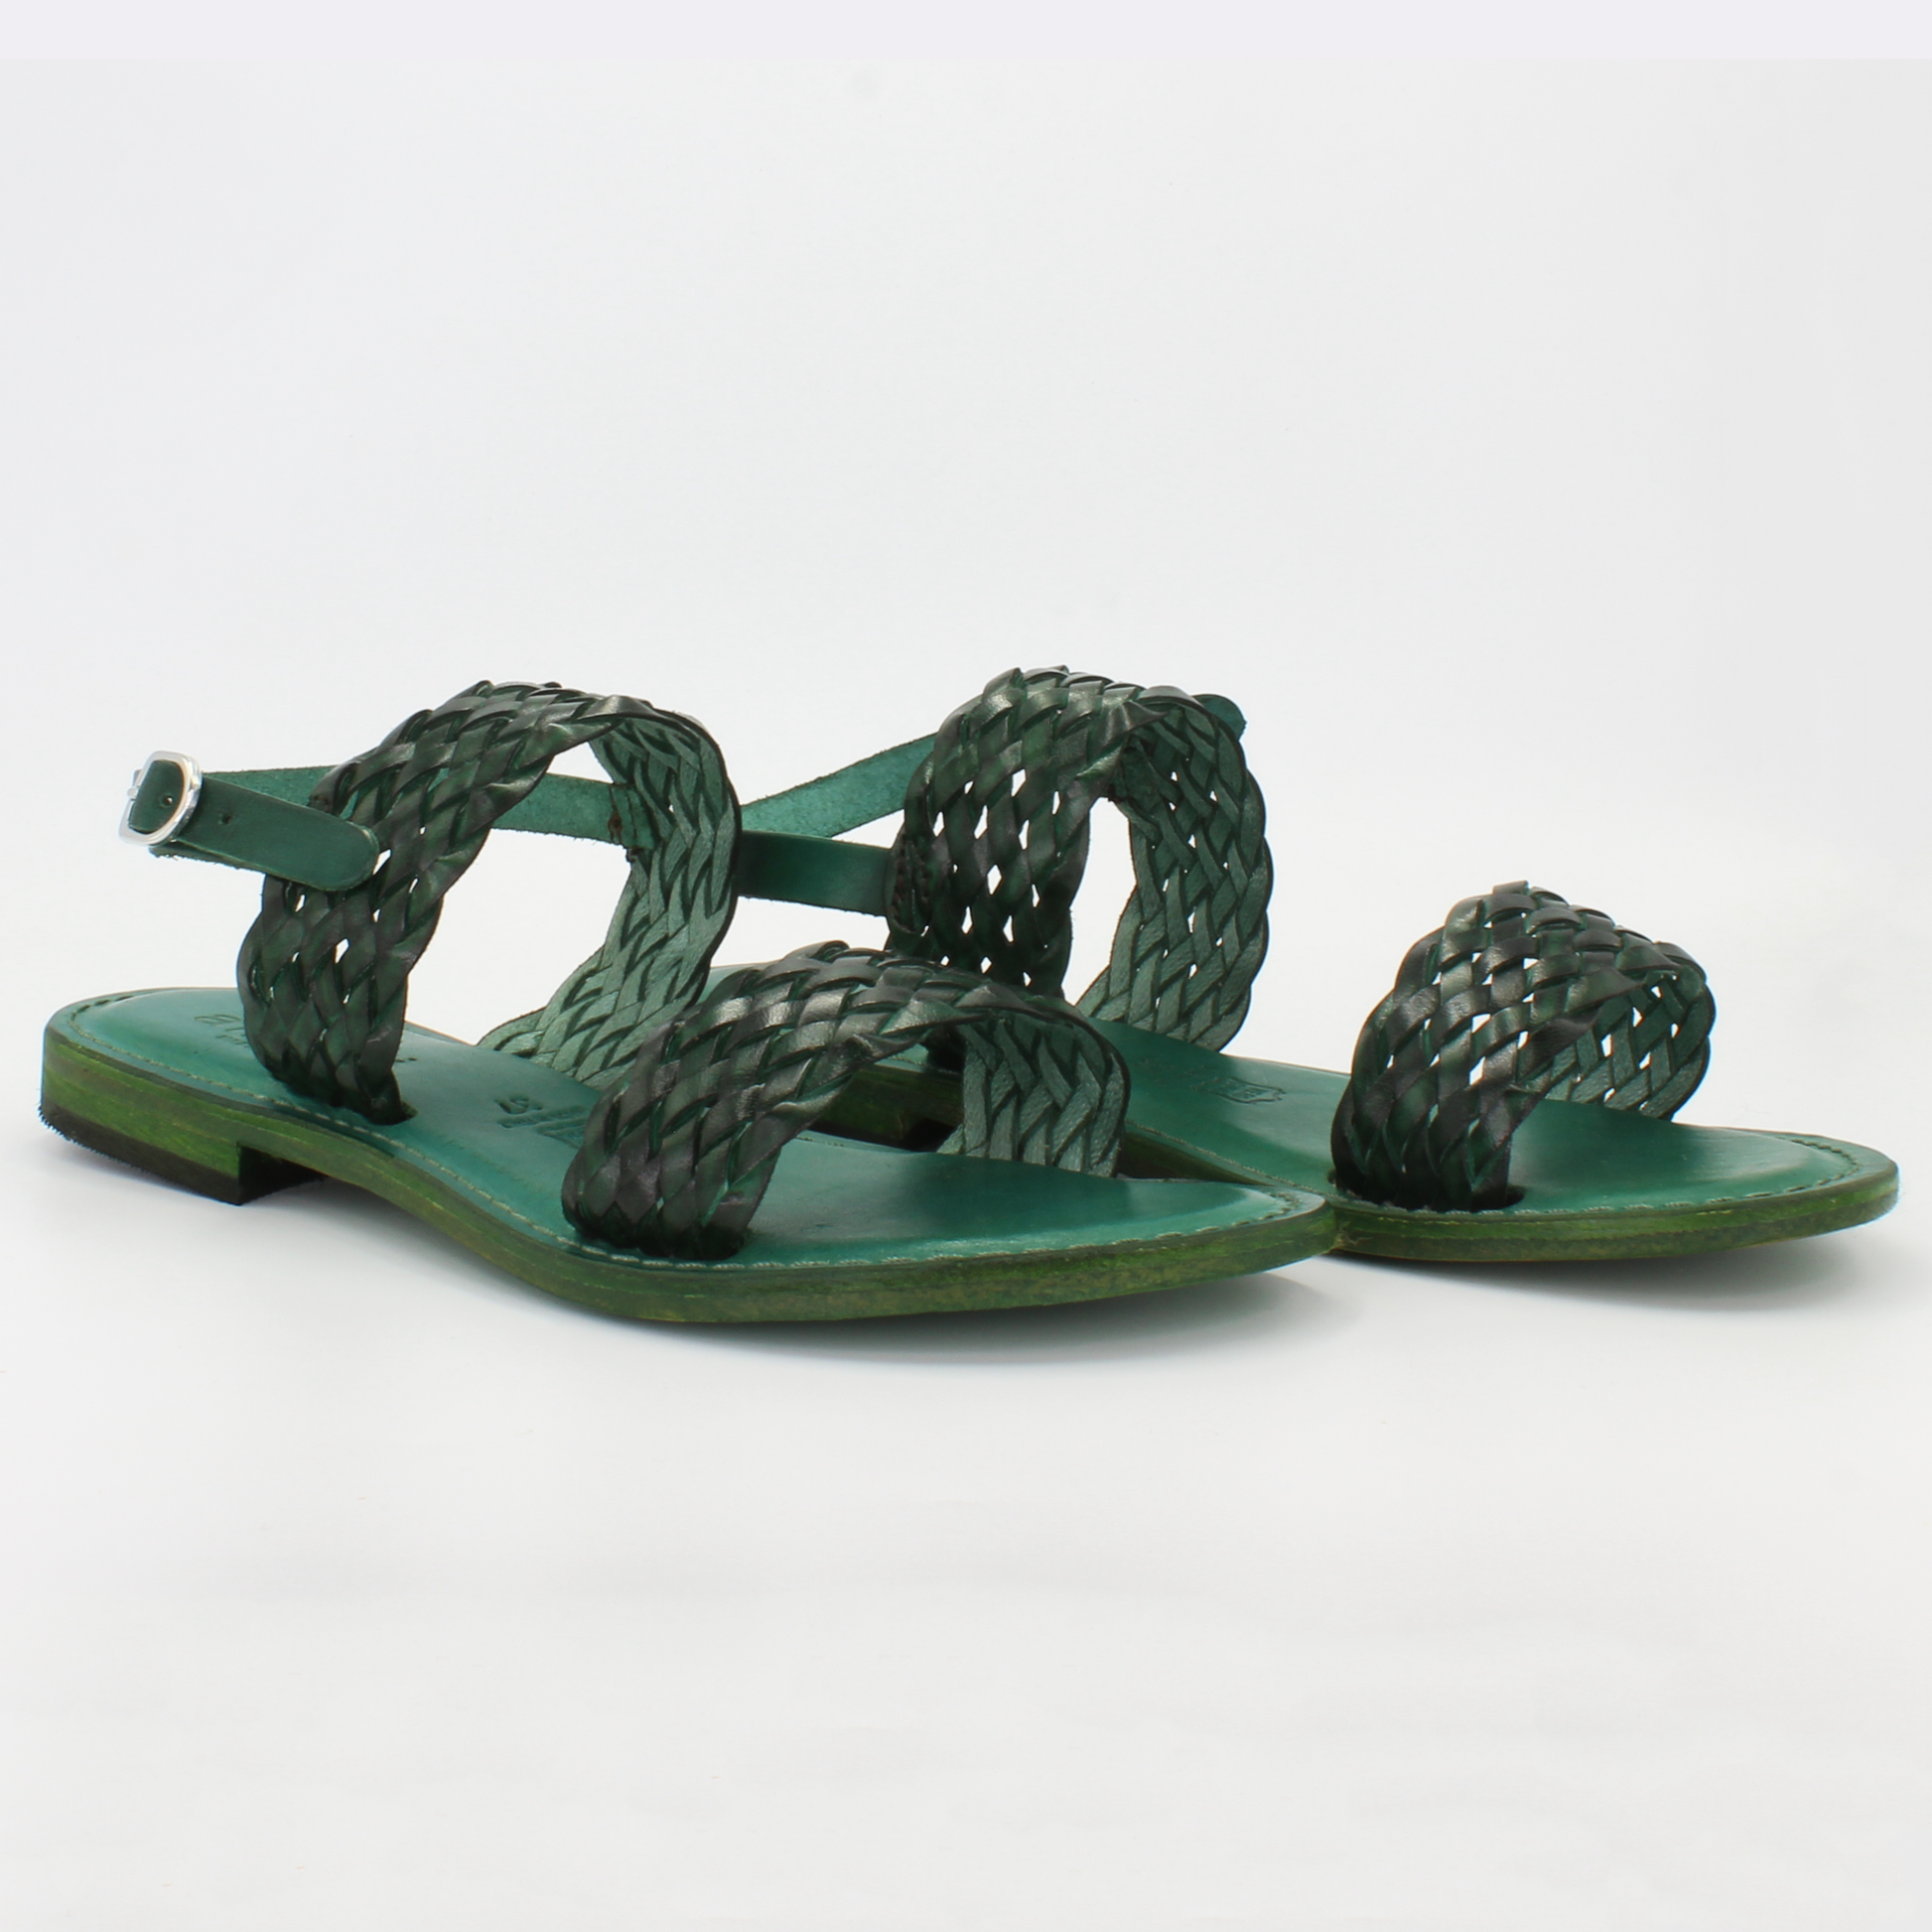 Shop Handmade Italian Leather woven sandal in verde (1040) or browse our range of hand-made Italian shoes in leather or suede in-store at Aliverti Cape Town, or shop online. We deliver in South Africa & offer multiple payment plans as well as accept multiple safe & secure payment methods.